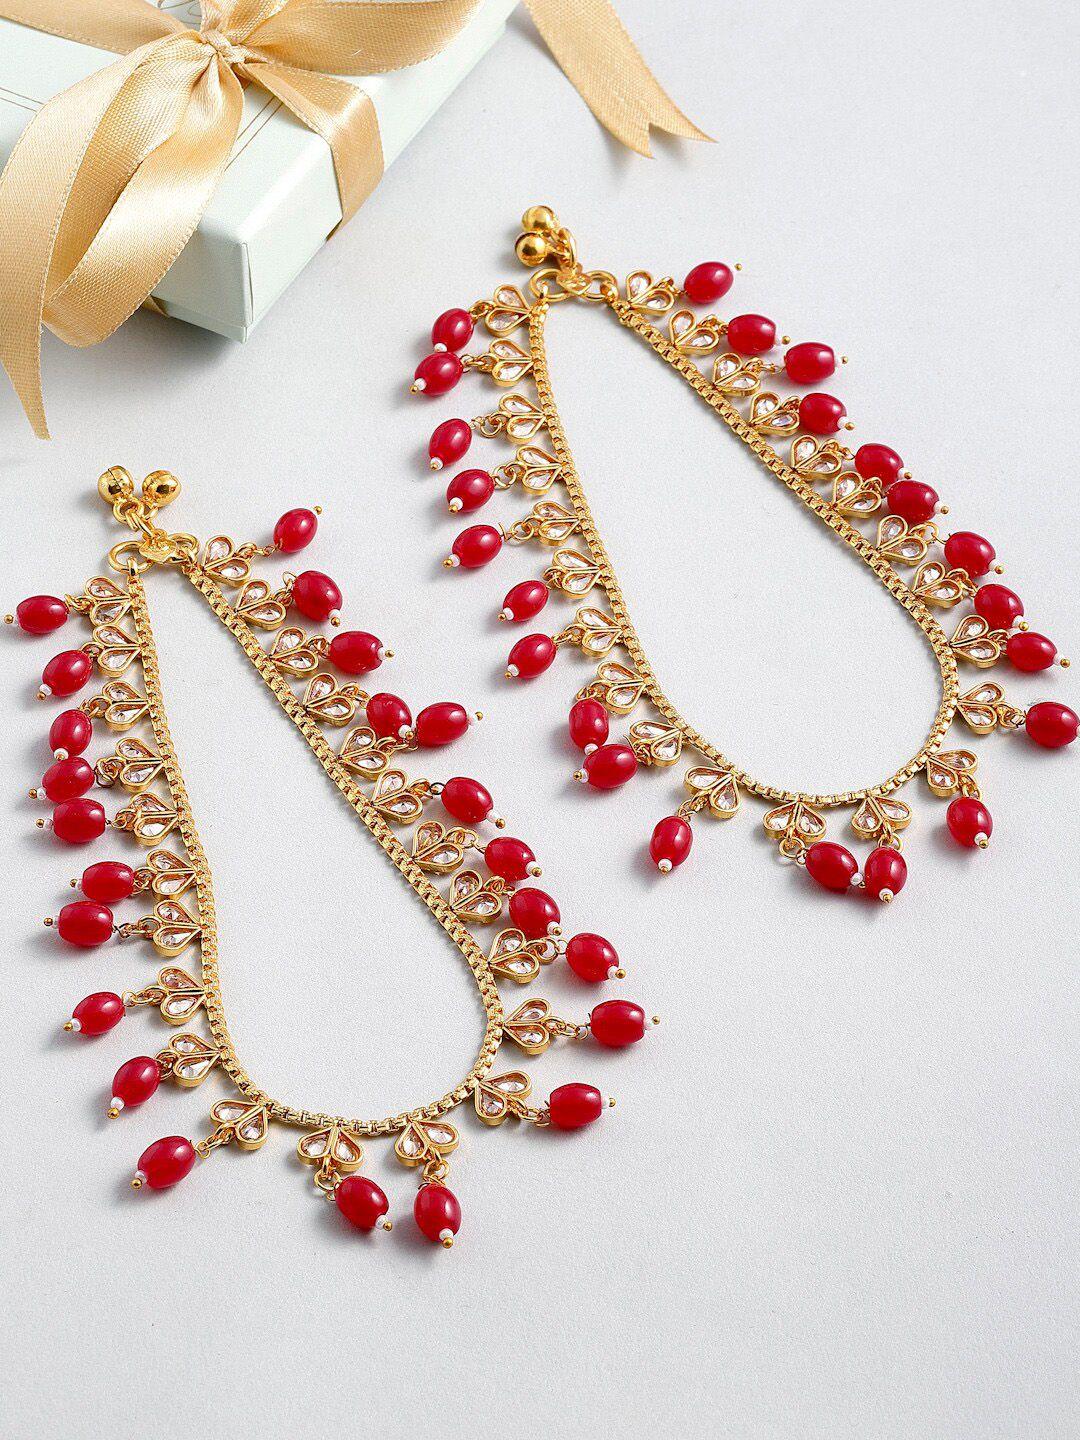 zeneme set of 2 gold-toned & red gold-plated kundan-studded beaded anklets